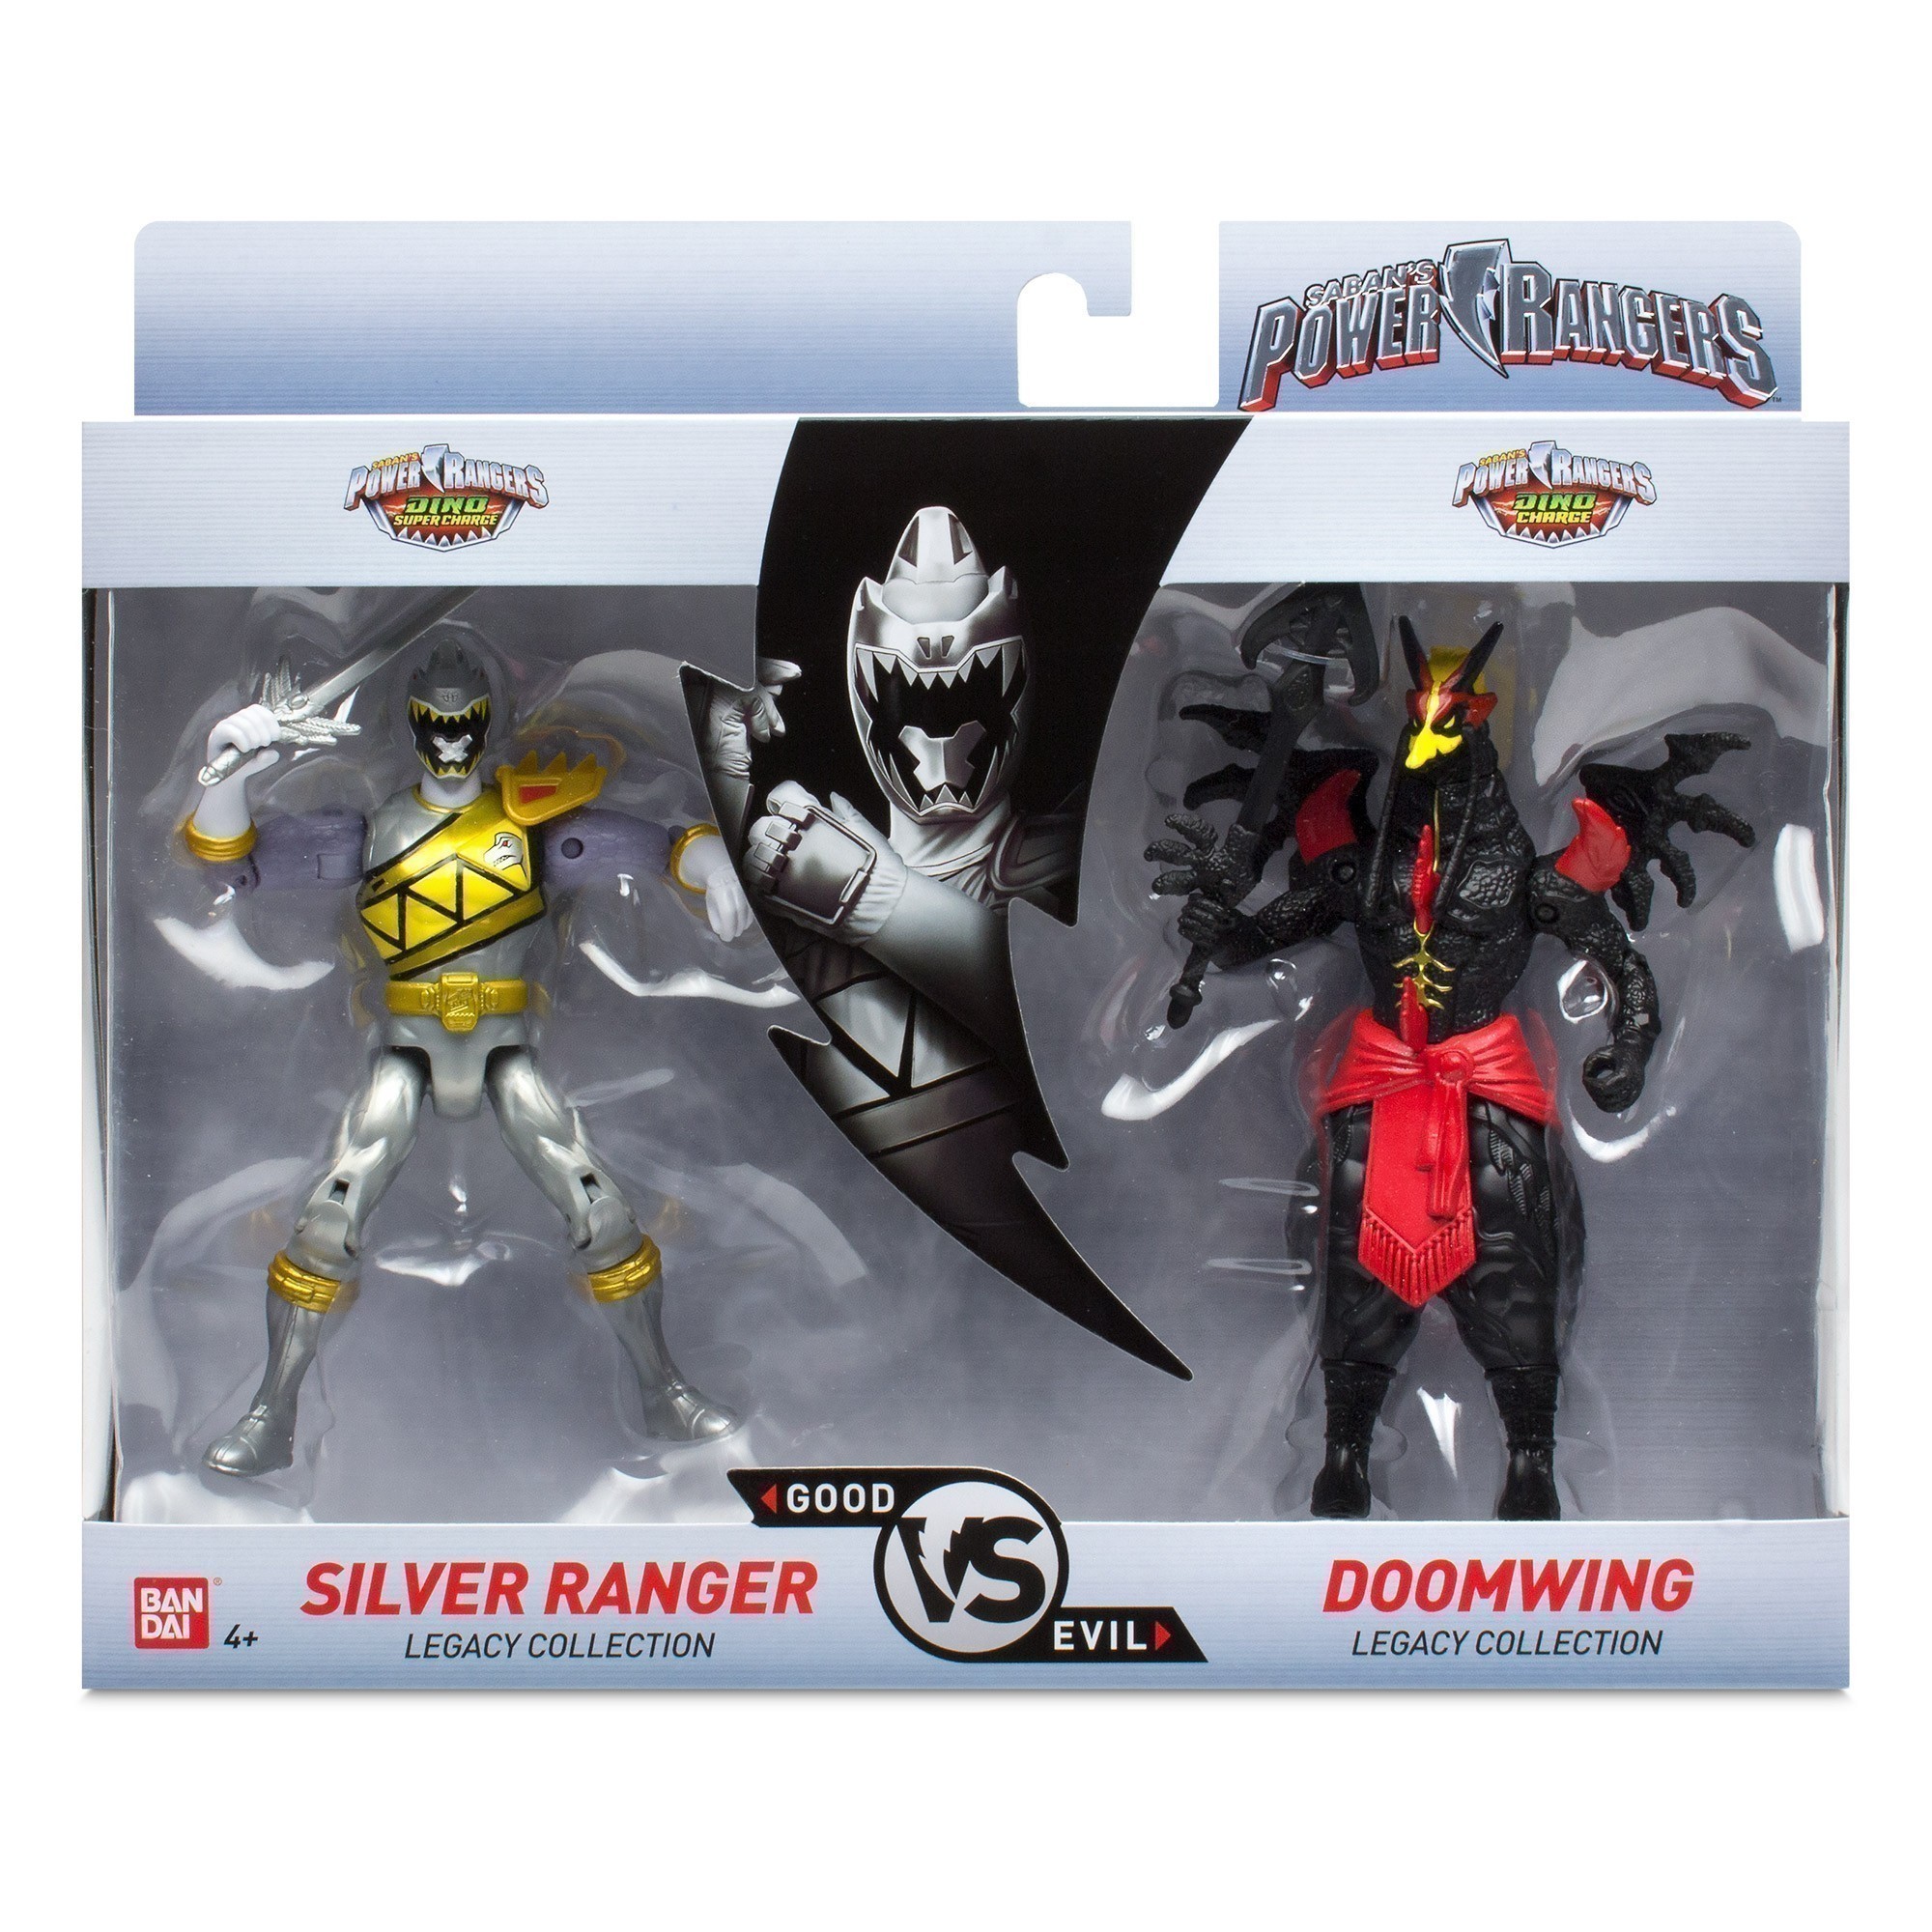 Power Rangers - Legacy Collection - Silver Ranger Vs Doomwing